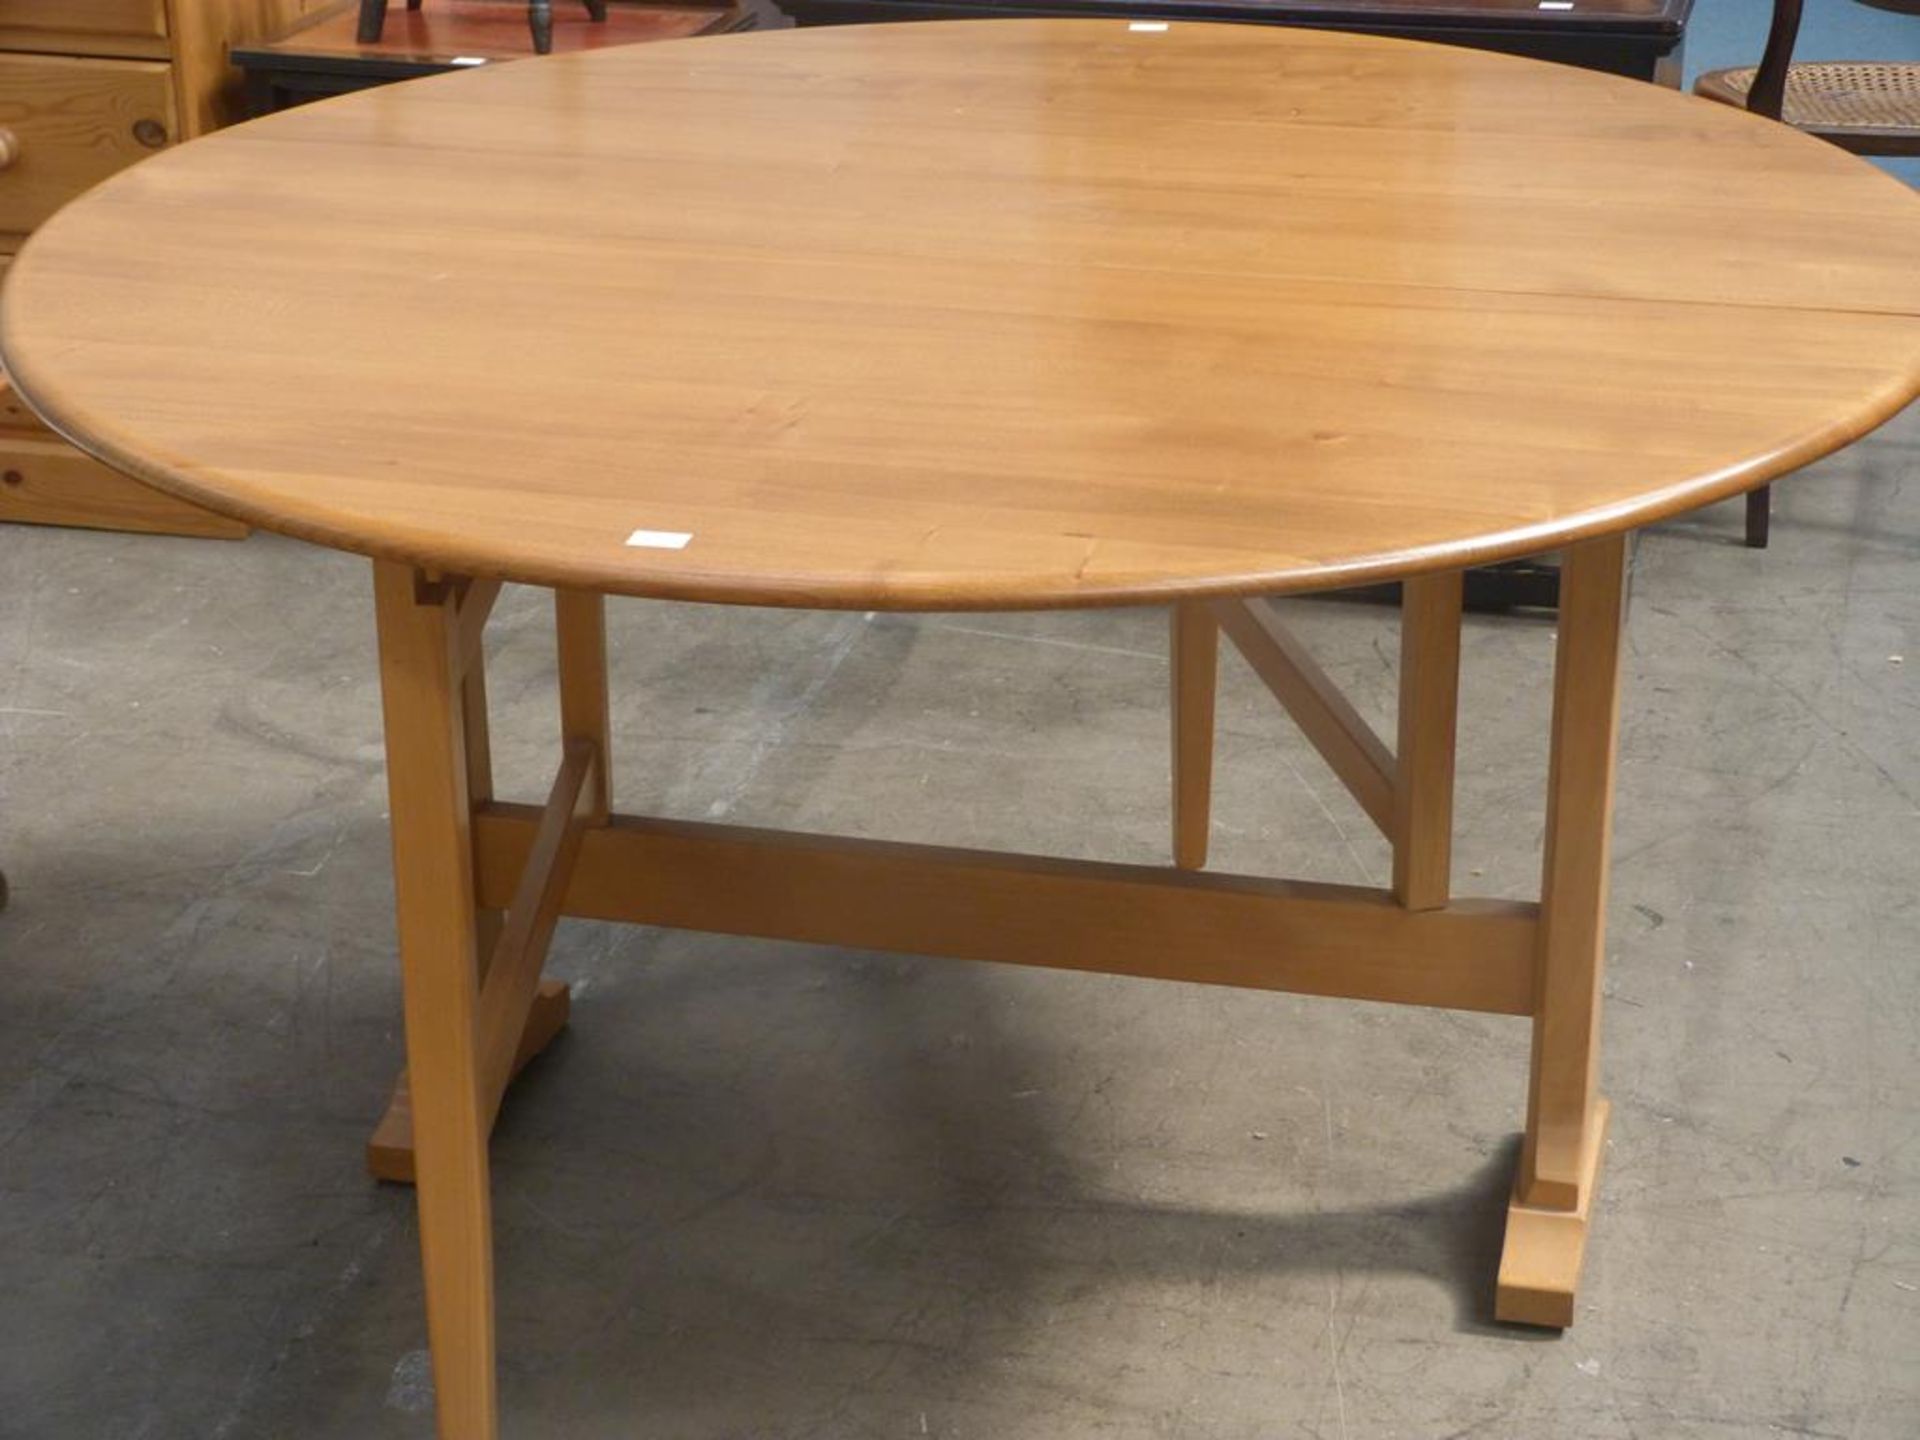 An Ercol (space saver) narrow oval drop leaf Dining Table (140cm extended) (est £50-£80)